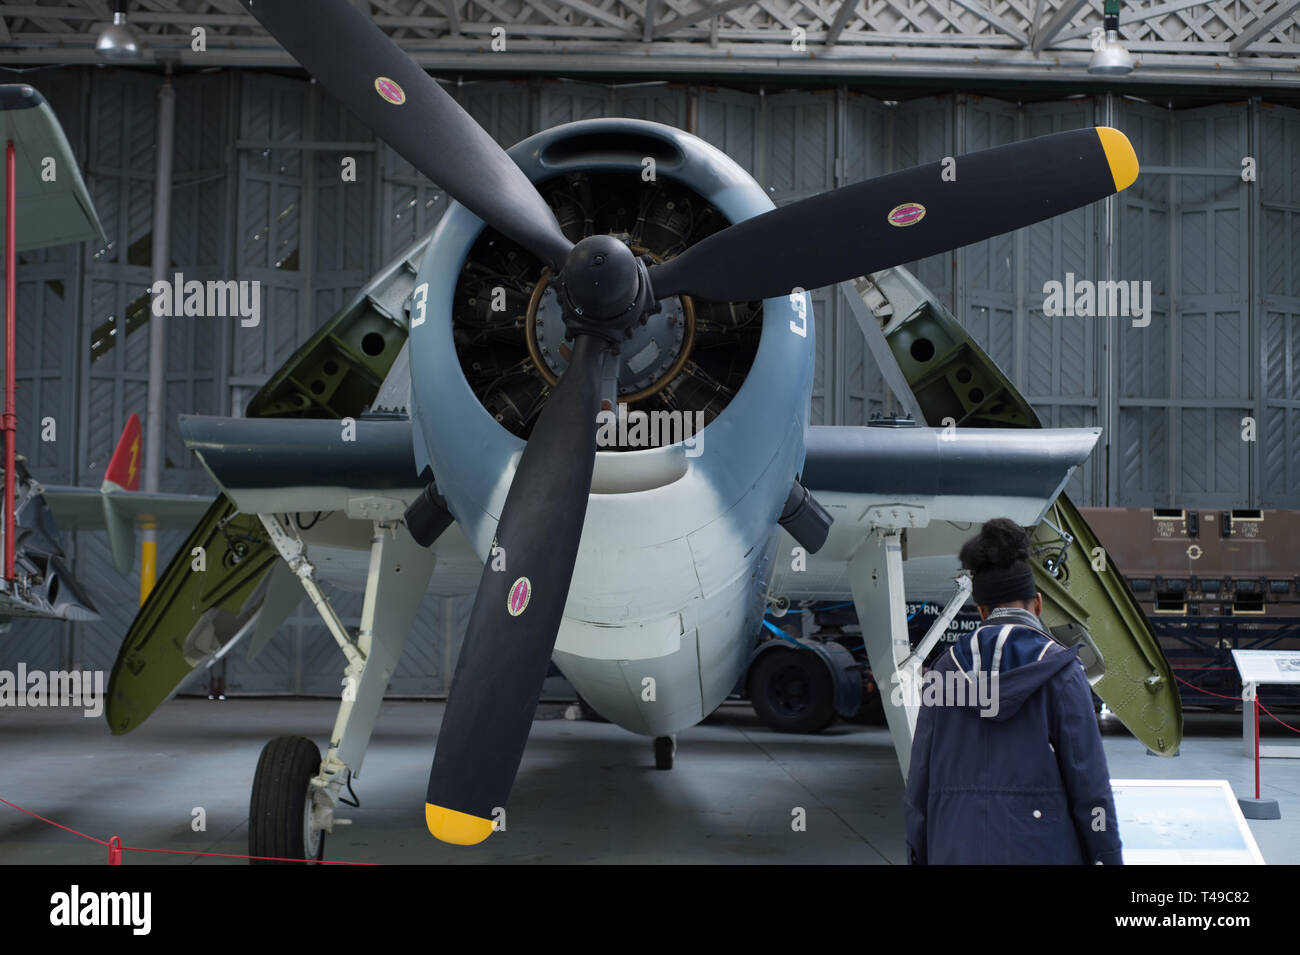 Visitor looking at Grumman TBM-3 Avenger. The aircraft is on display at Duxford Imperial War Musuem in England. Stock Photo